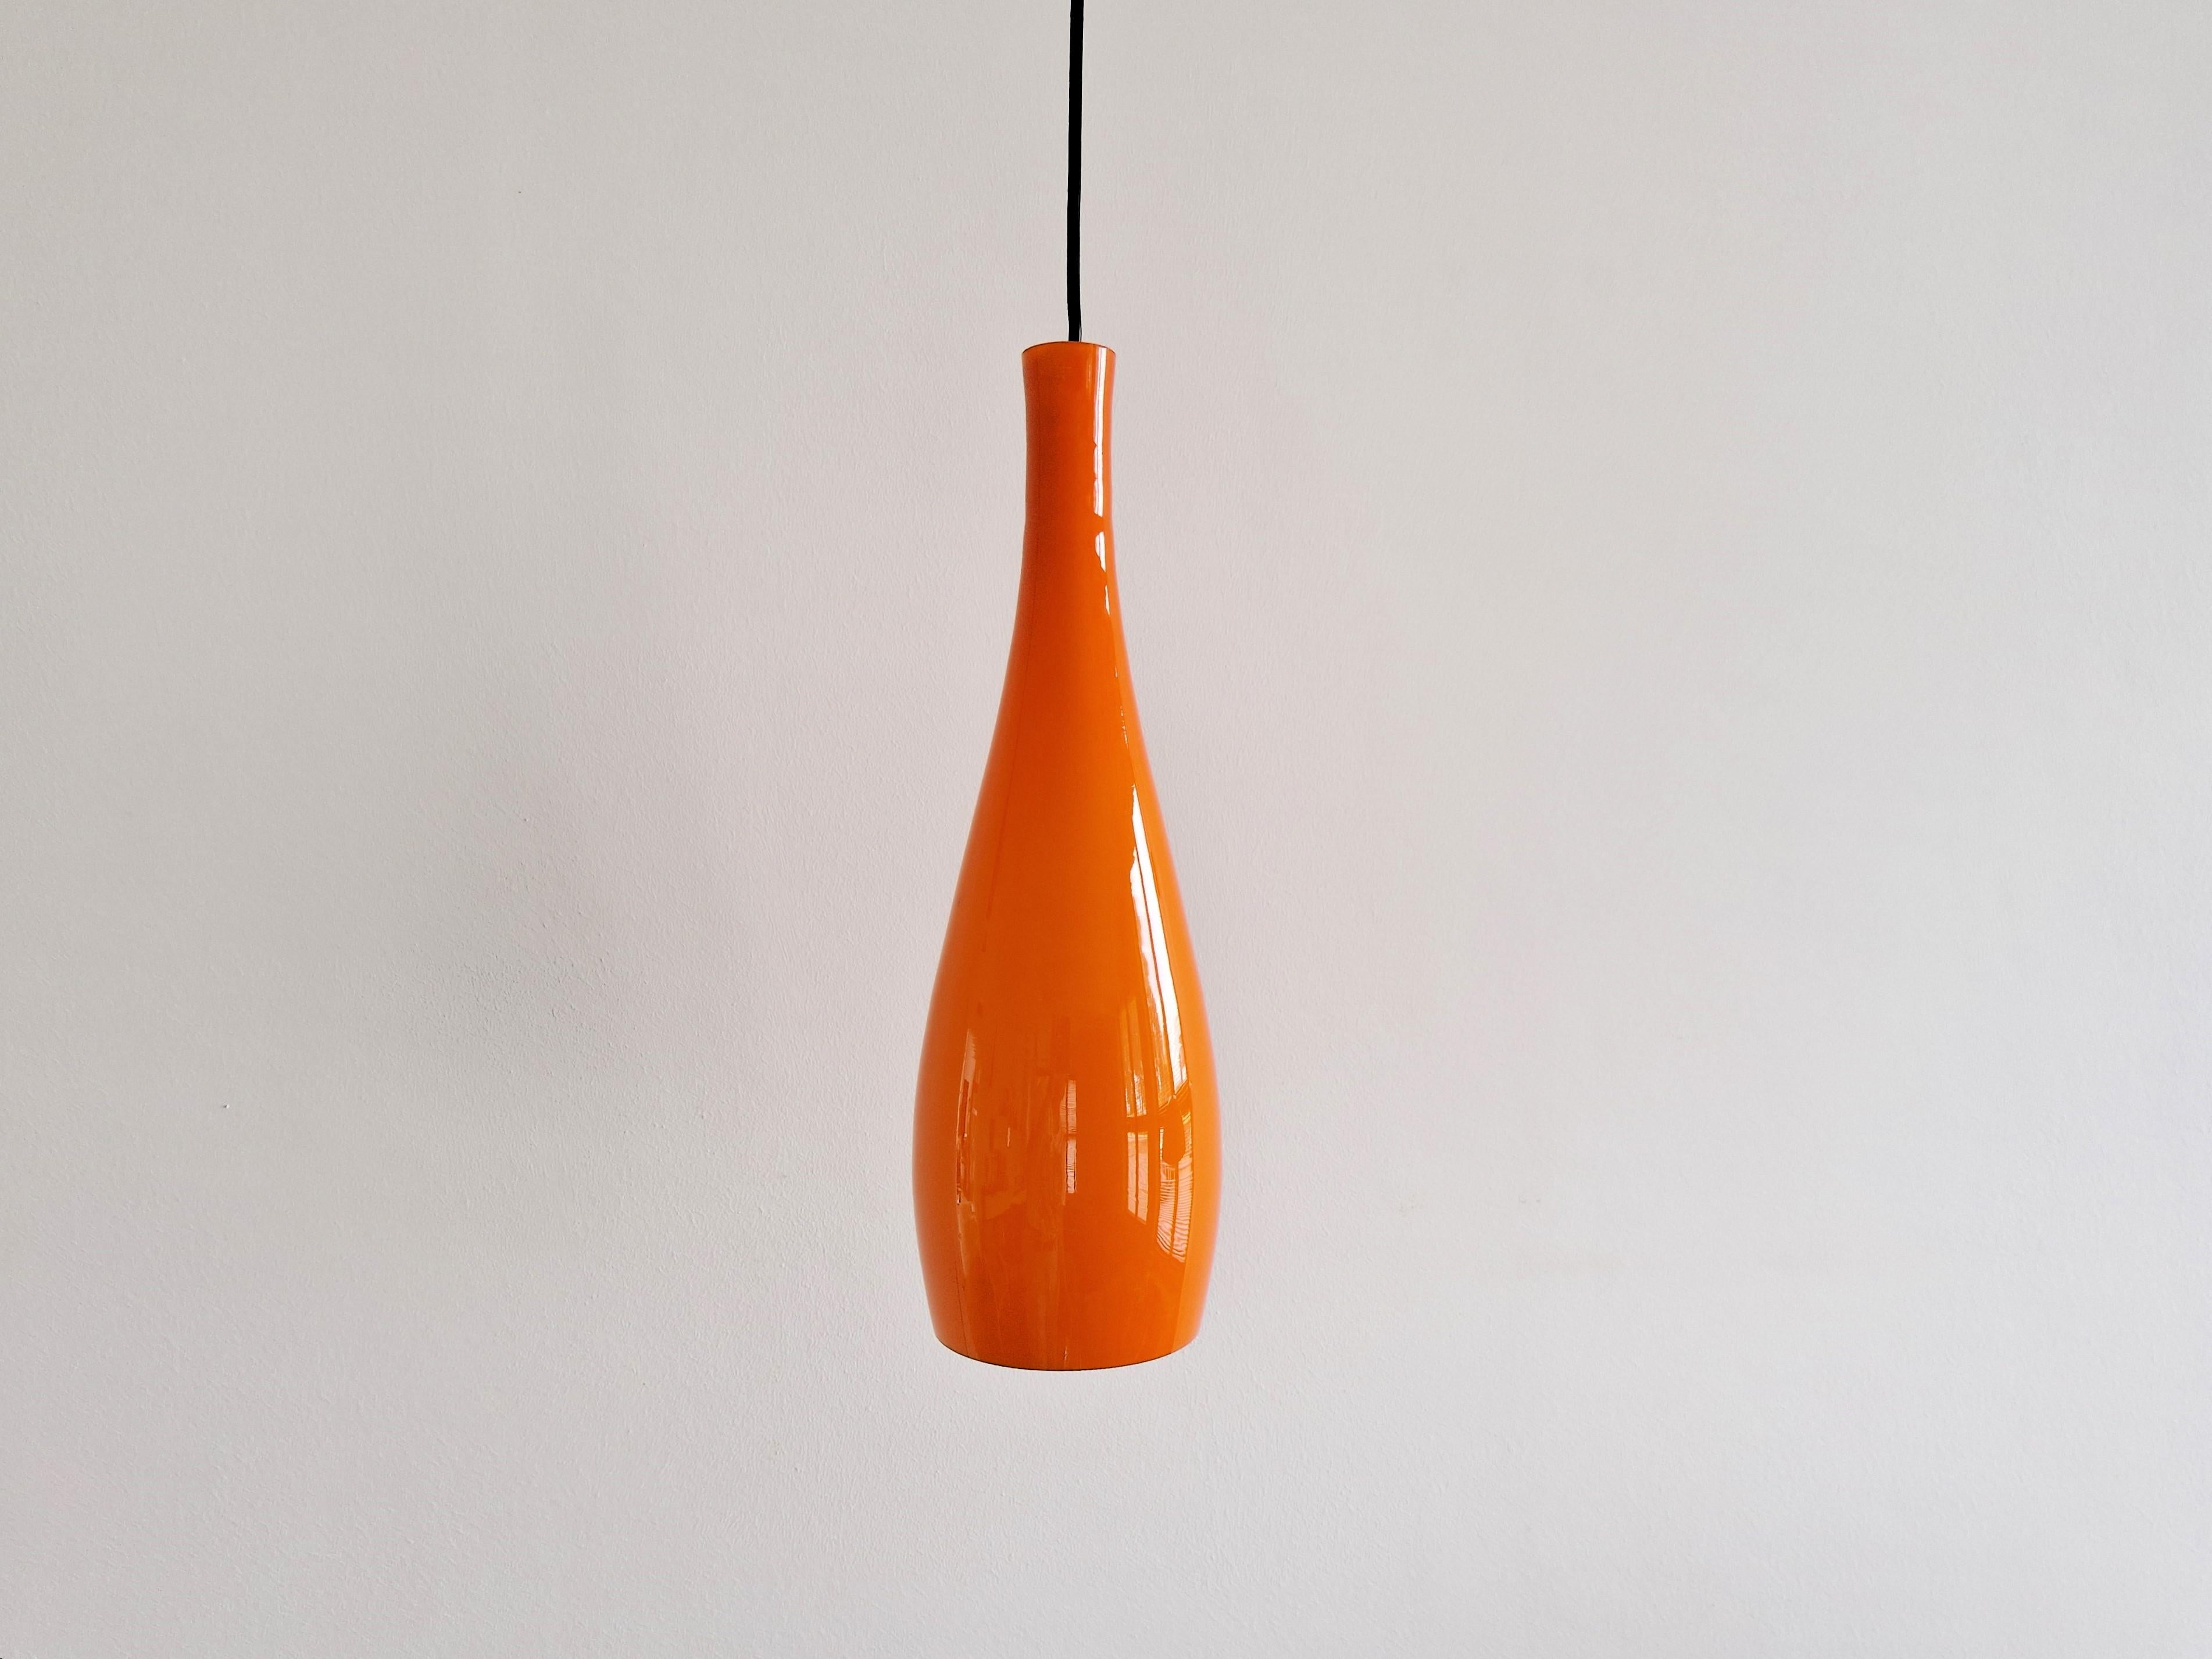 The elegant, droplet shaped pendant lamp, model 'Bang' was designed by Jacob Eiler Bang for Fog & Mørup in Denmark in the 1960's. This lamp is made of orange colored glass with a white opaline inside that spreads a beautiful warm and soft light. It